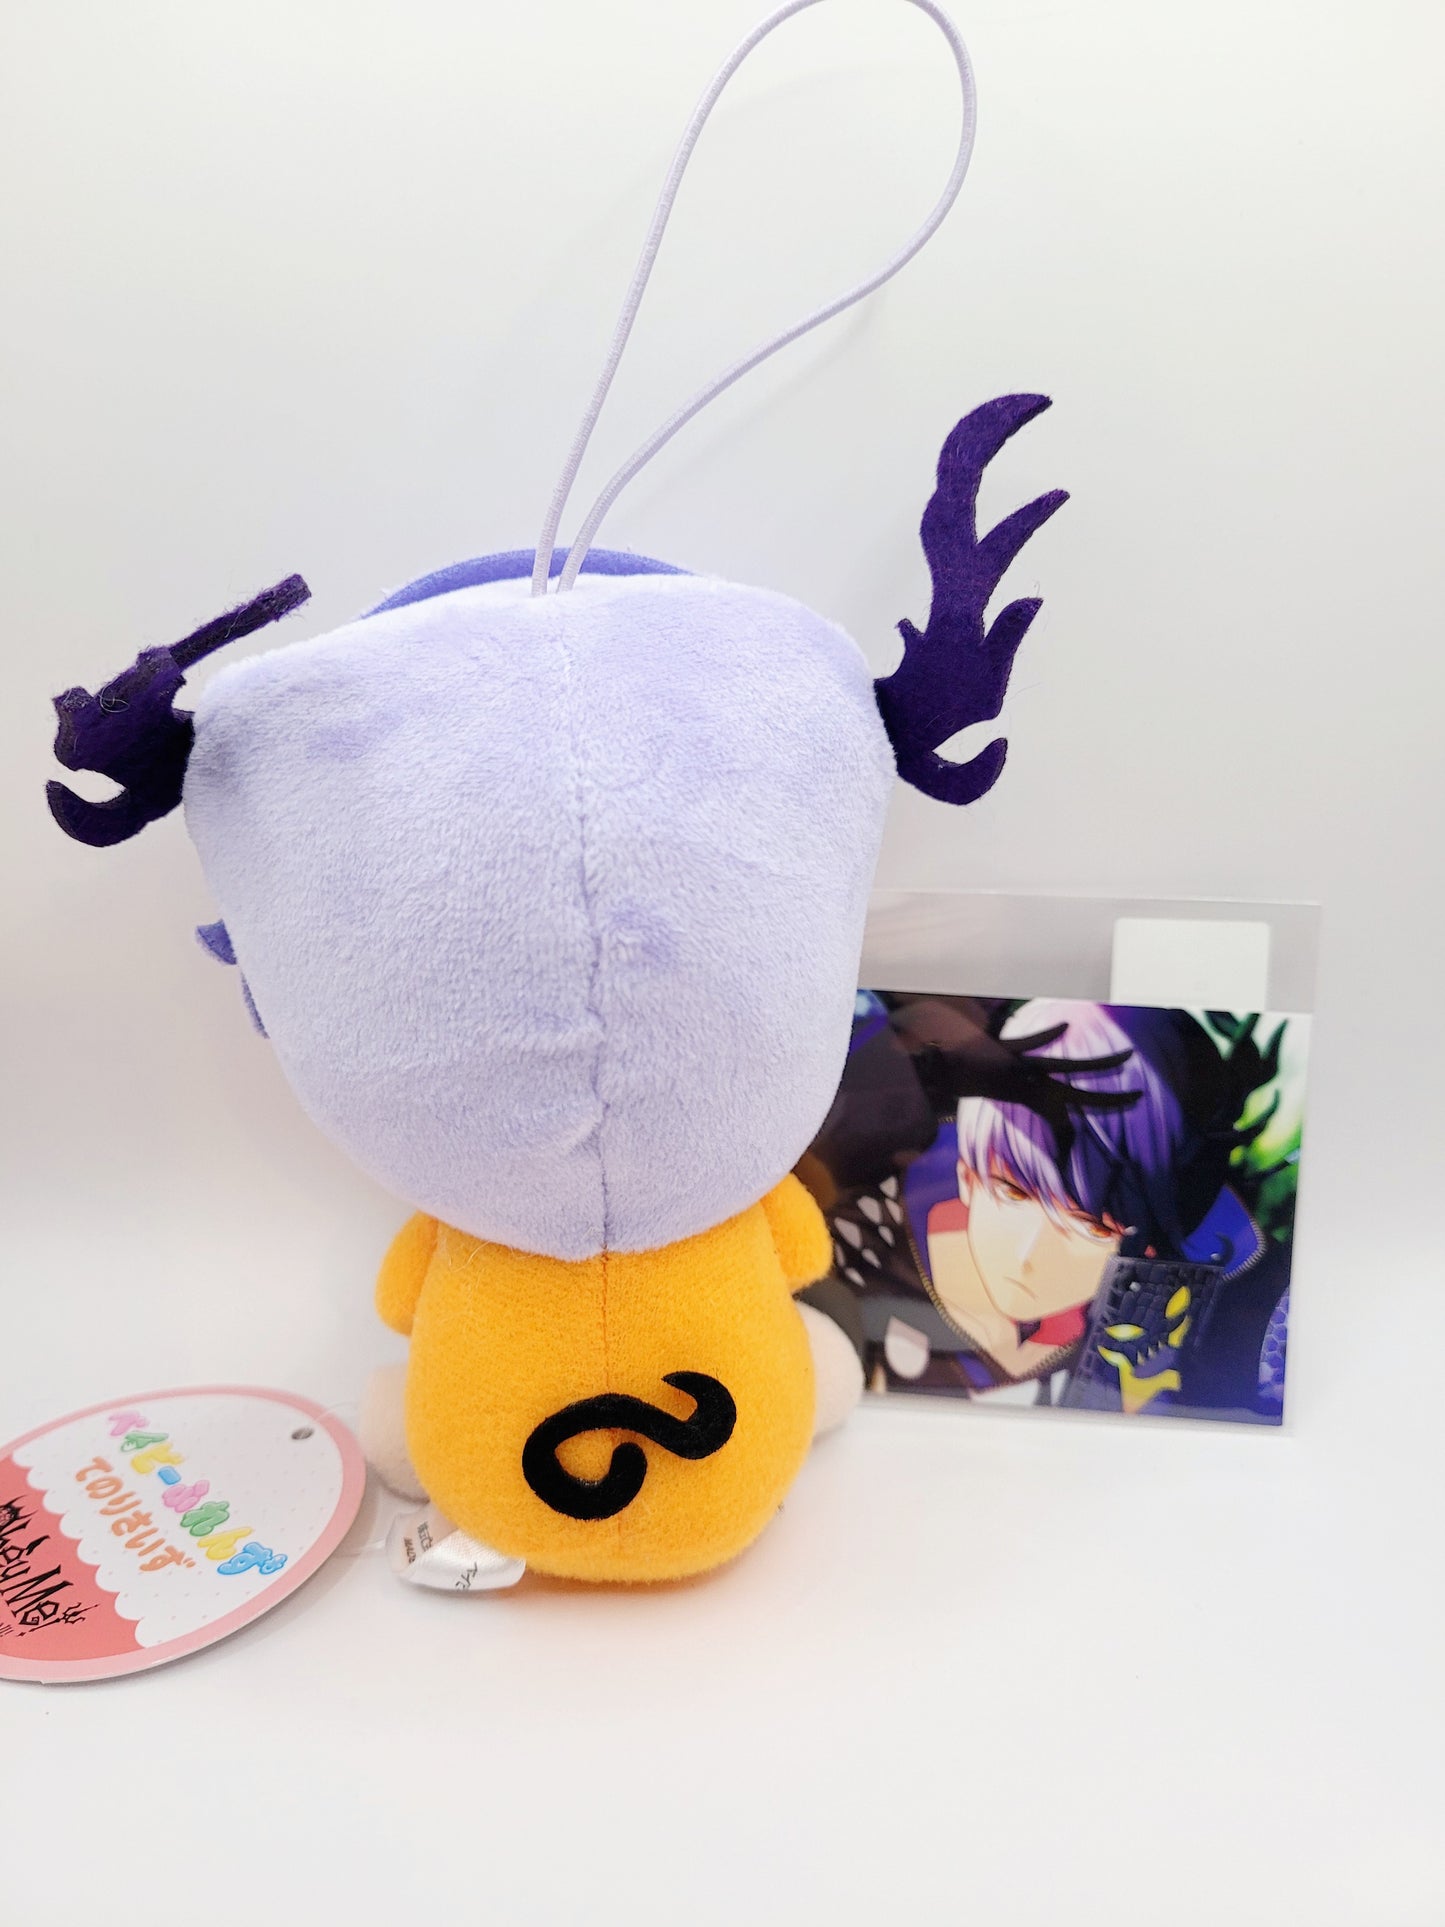 Obey Me! Baby Leviathan Mini Plush & Character Card